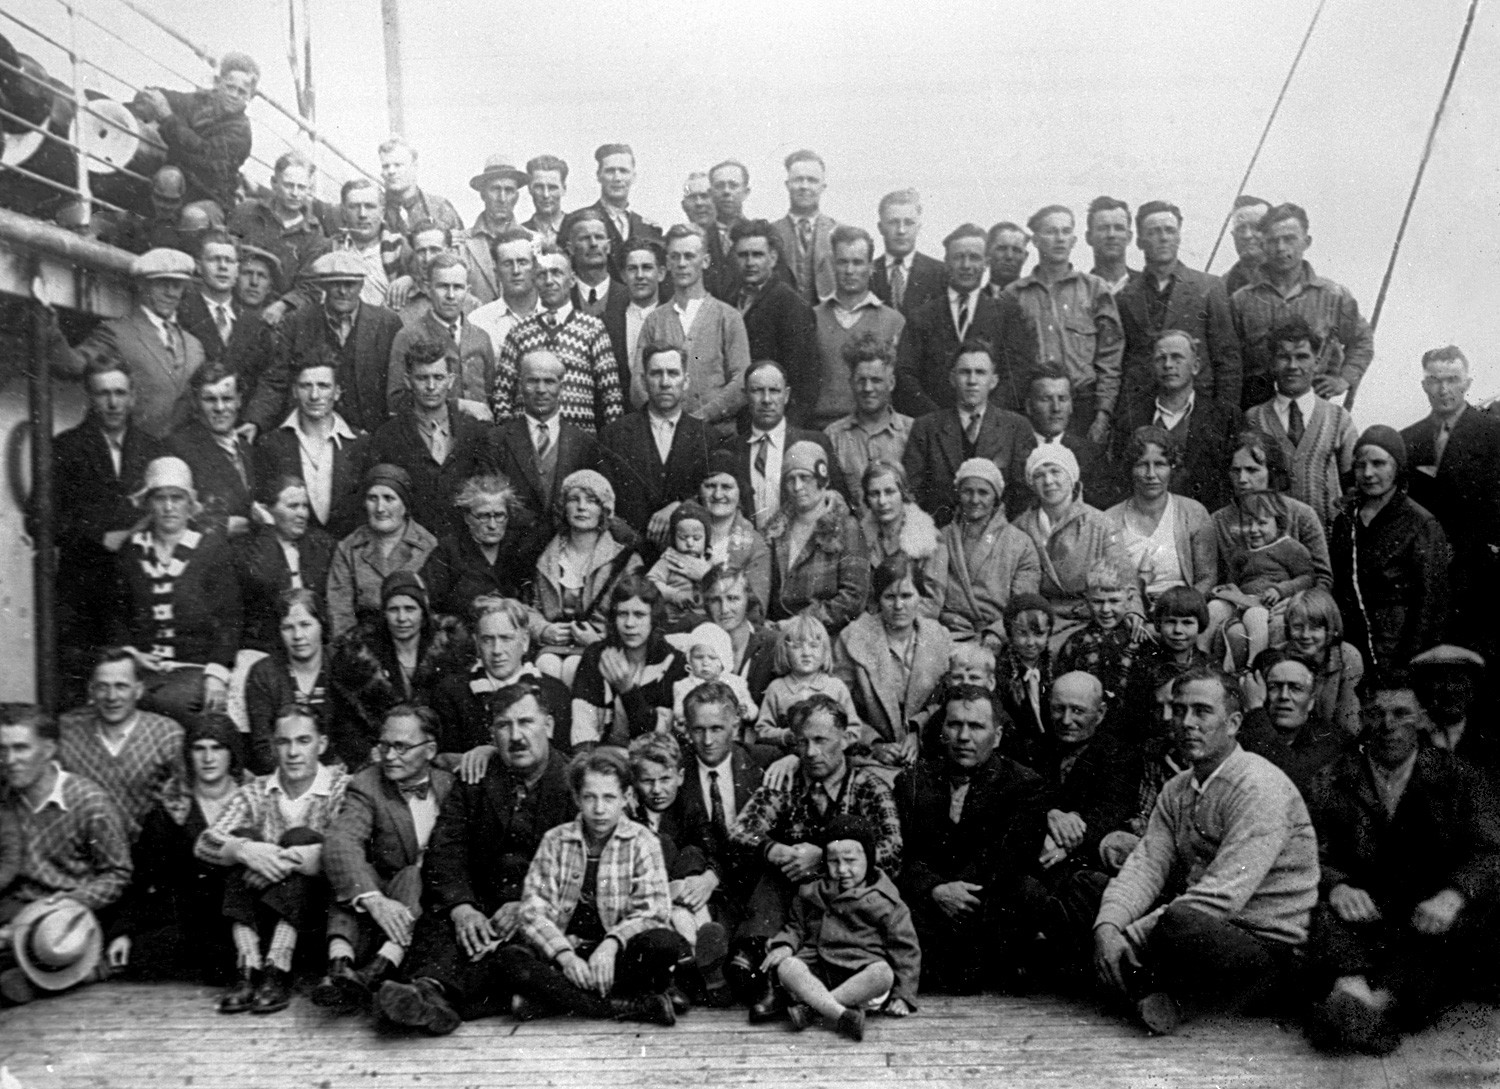 First groups of workers from the U.S. and Canada visiting Soviet Union. As you can see, black folks were rare among them.